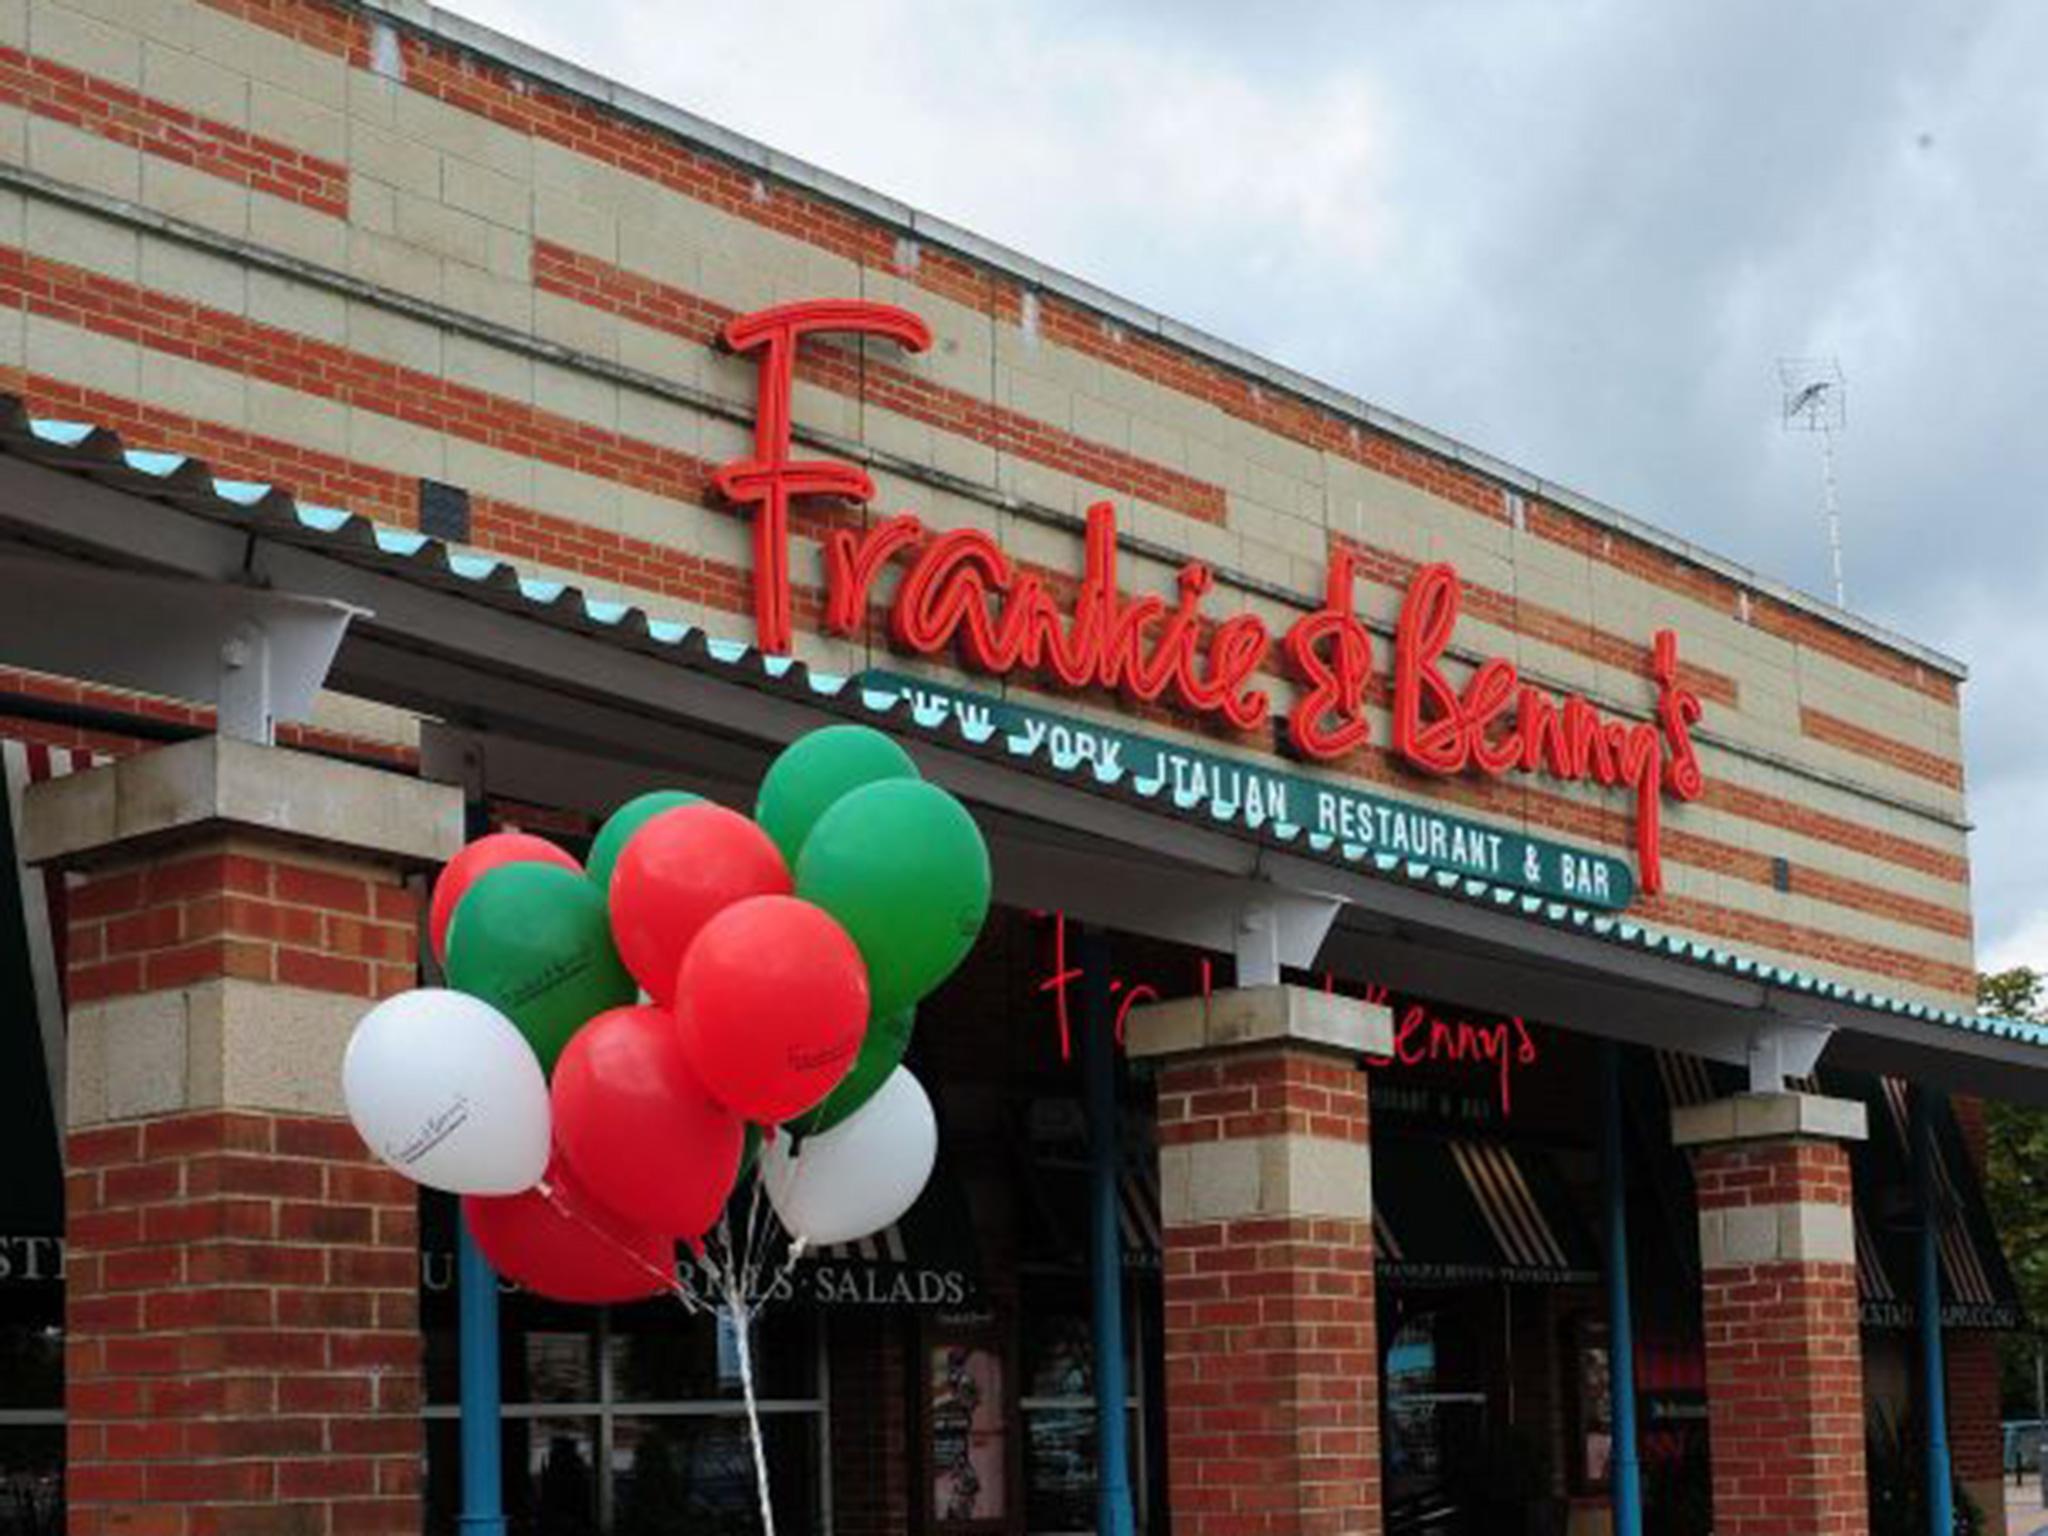 The Restaurant Group, the owner of the Frankie & Benny's and Chiquito chains, will sell or close 33 outlets